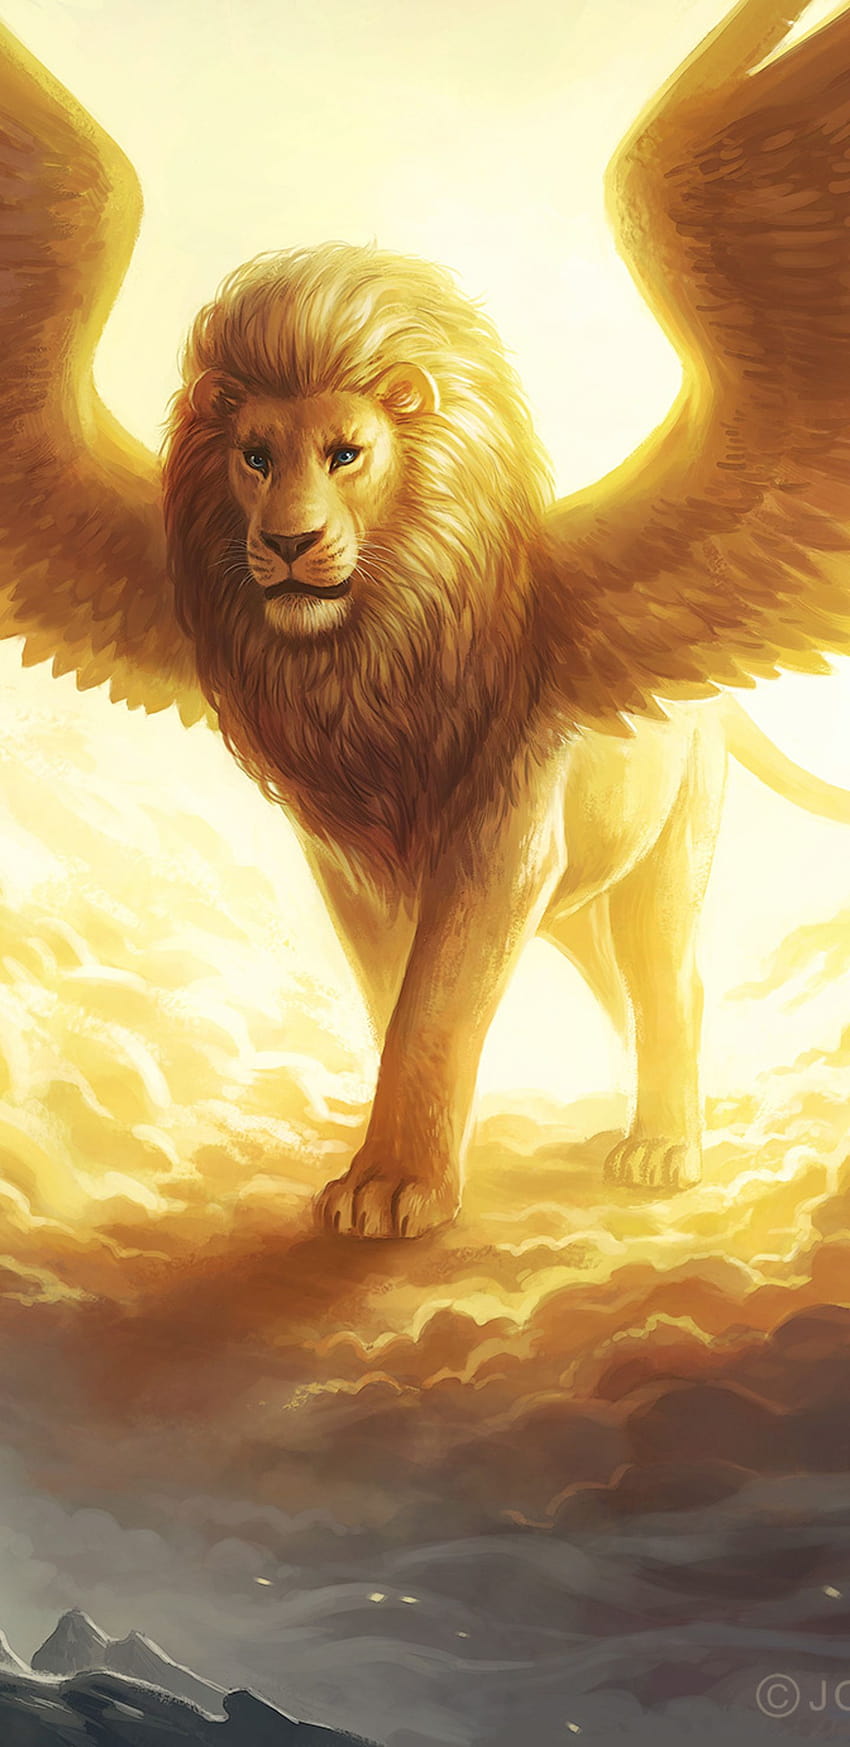 1440x2960 Lion King Spiritual Dark Fantasy Samsung Galaxy Note 9,8, S9,S8,S Q , Backgrounds, and, golden lion HD phone wallpaper